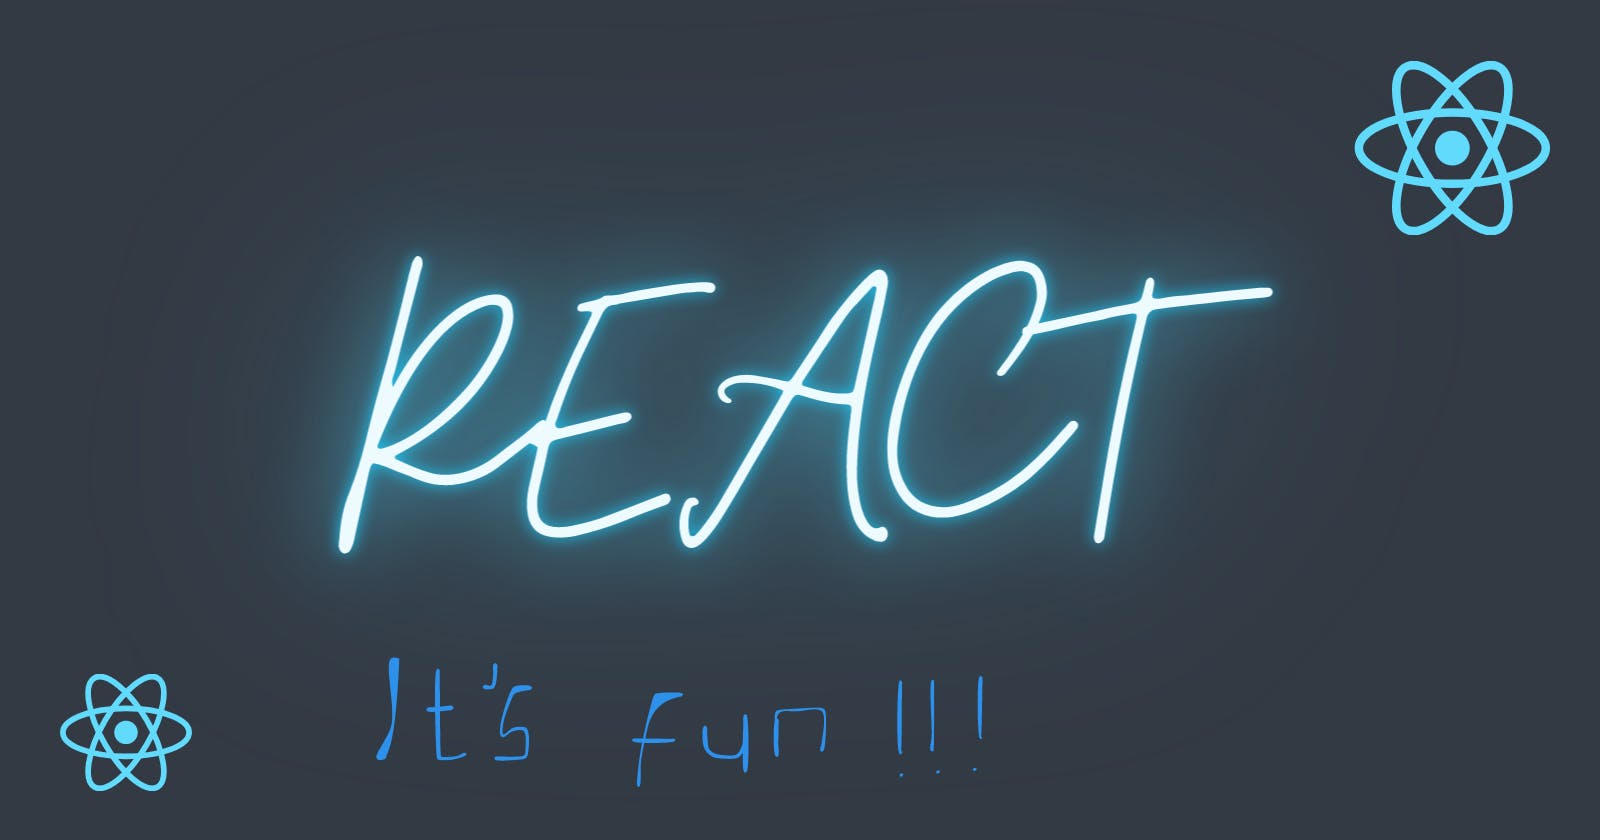 Introduction to React and its core concepts